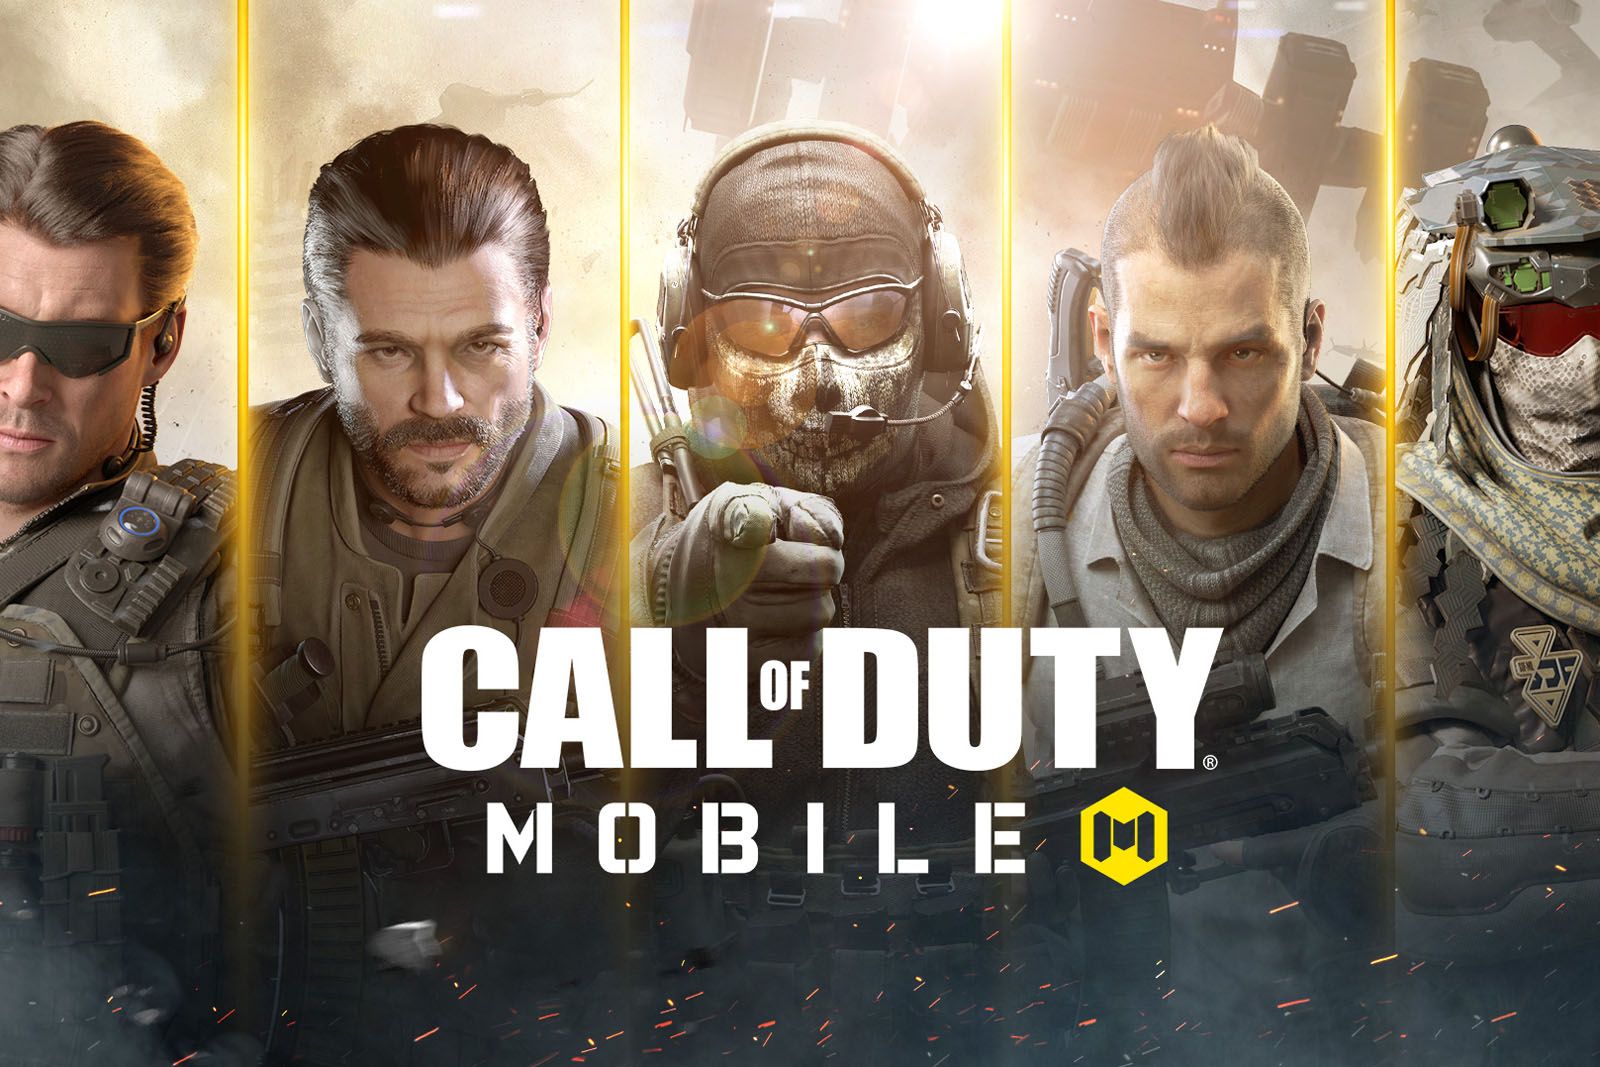 Call of Duty Mobile makes the move to 120Hz for smoother multiplayer gaming photo 1